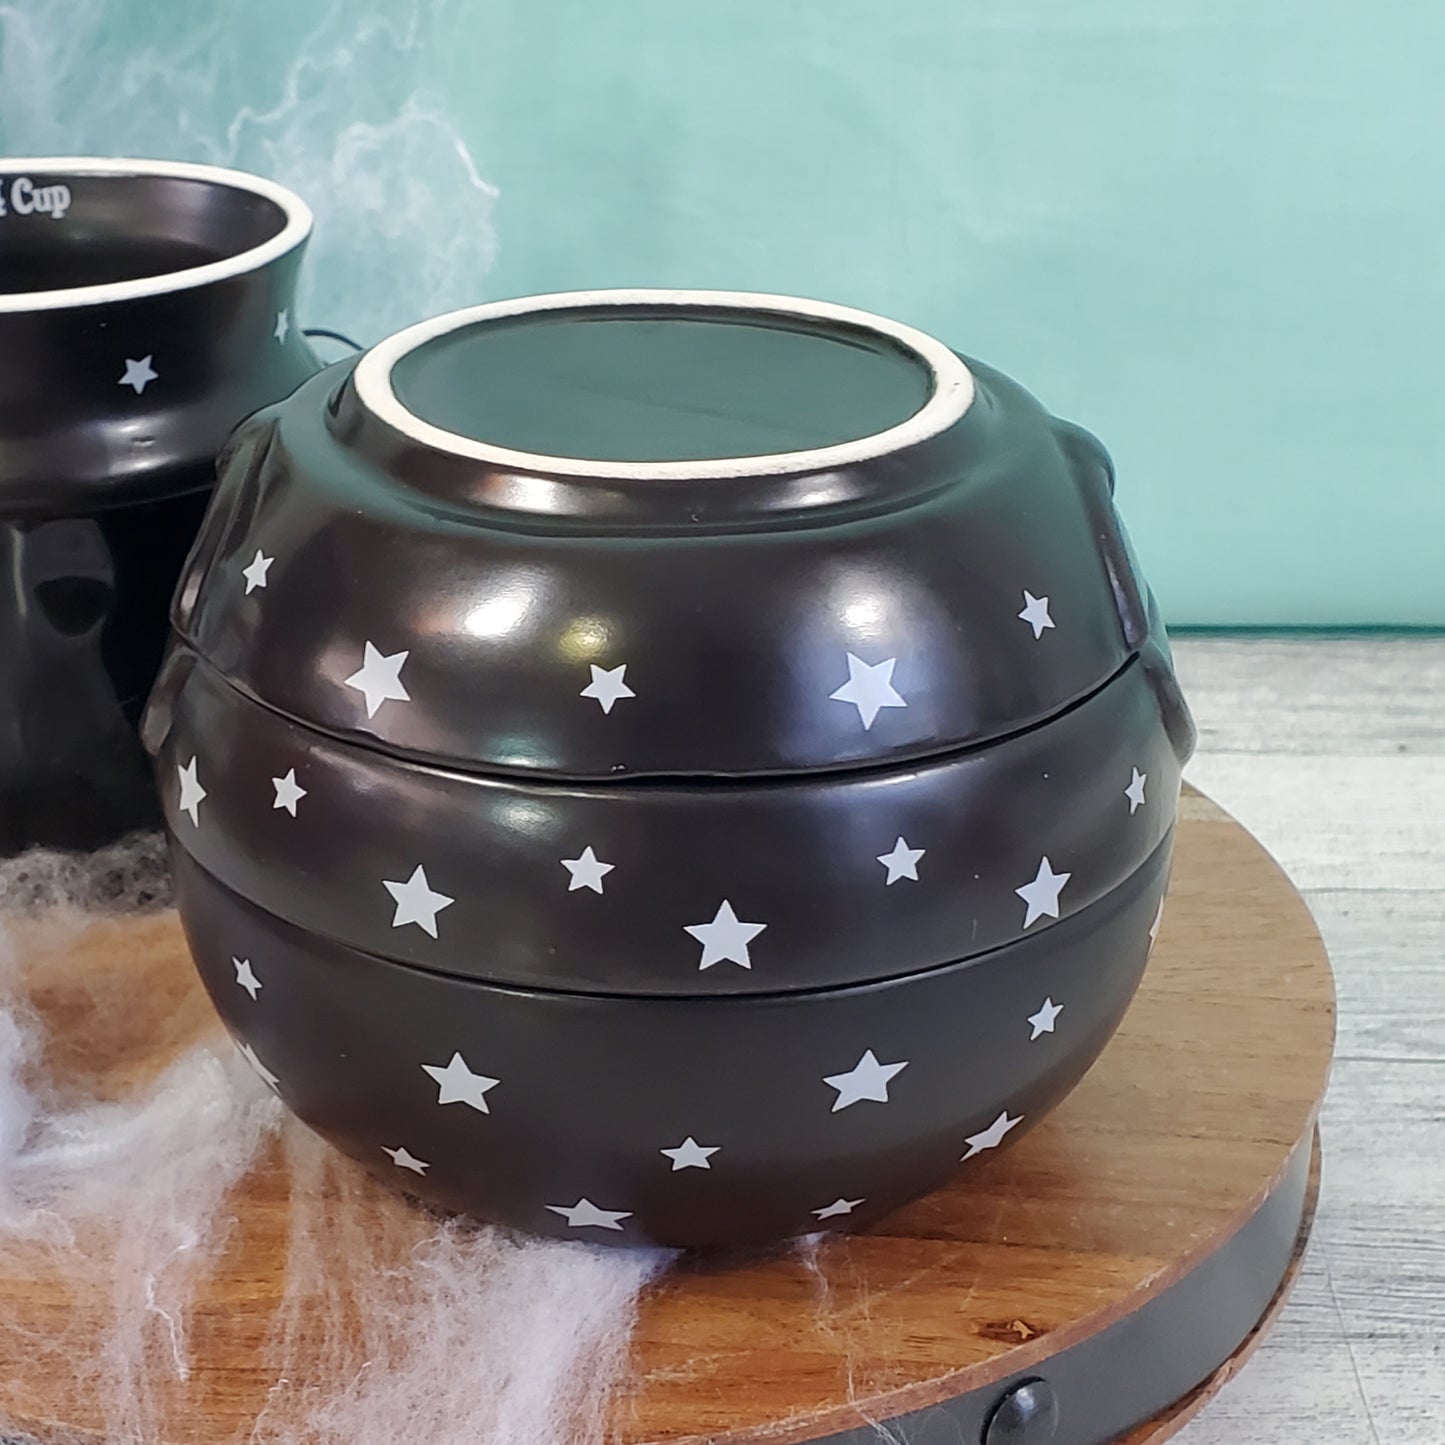 Witch's Cauldron Ceramic Measuring Cups Set by 10 Strawberry Street - 4-Piece Black with White Stars